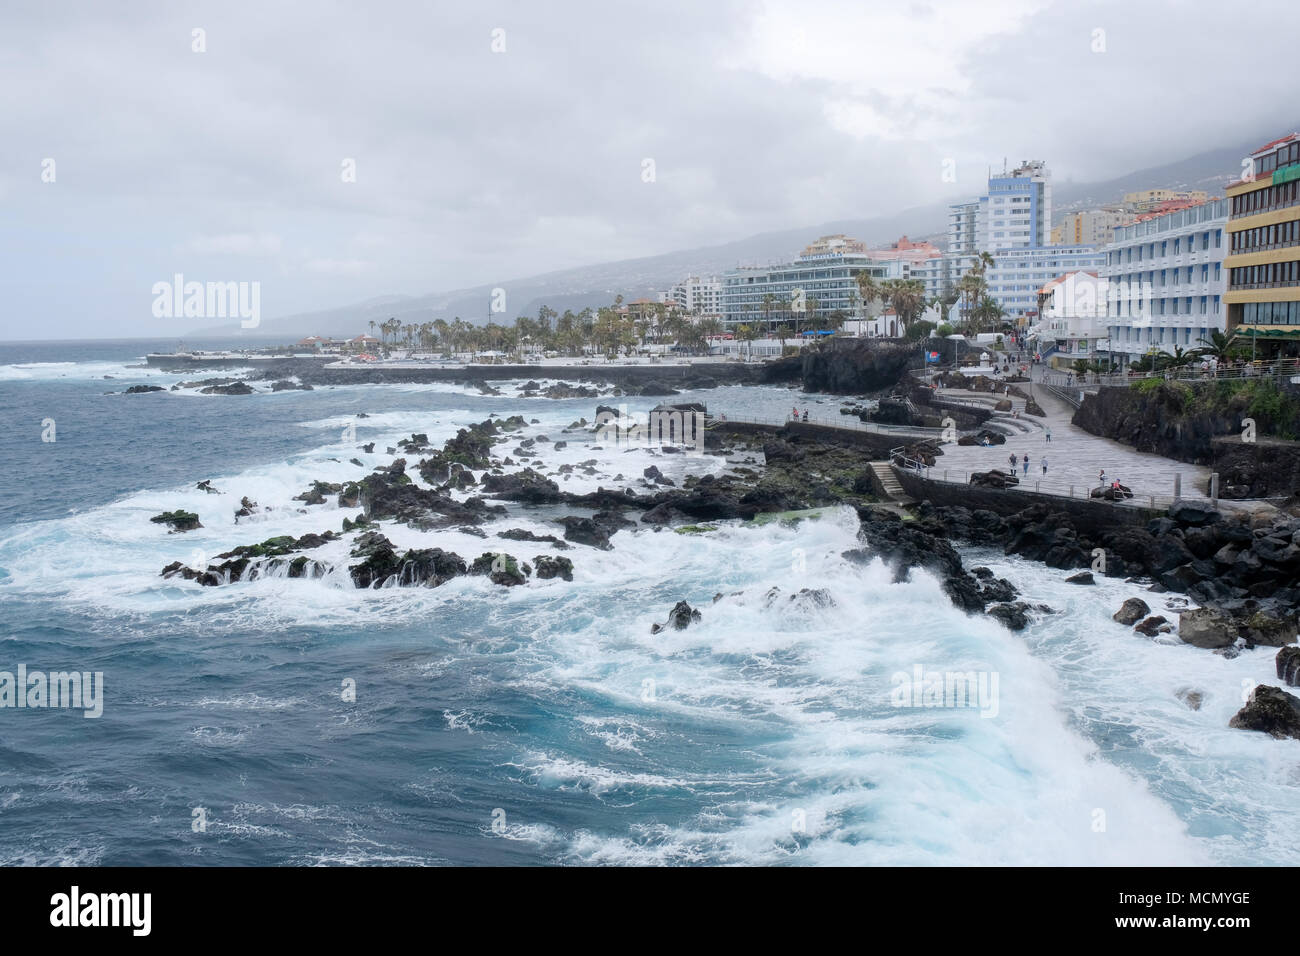 Puerto de la Cruz, Tenerife, Canary Islands; rough seas on the  well-maintained seafront as the wind picks up from an approaching storm  Stock Photo - Alamy